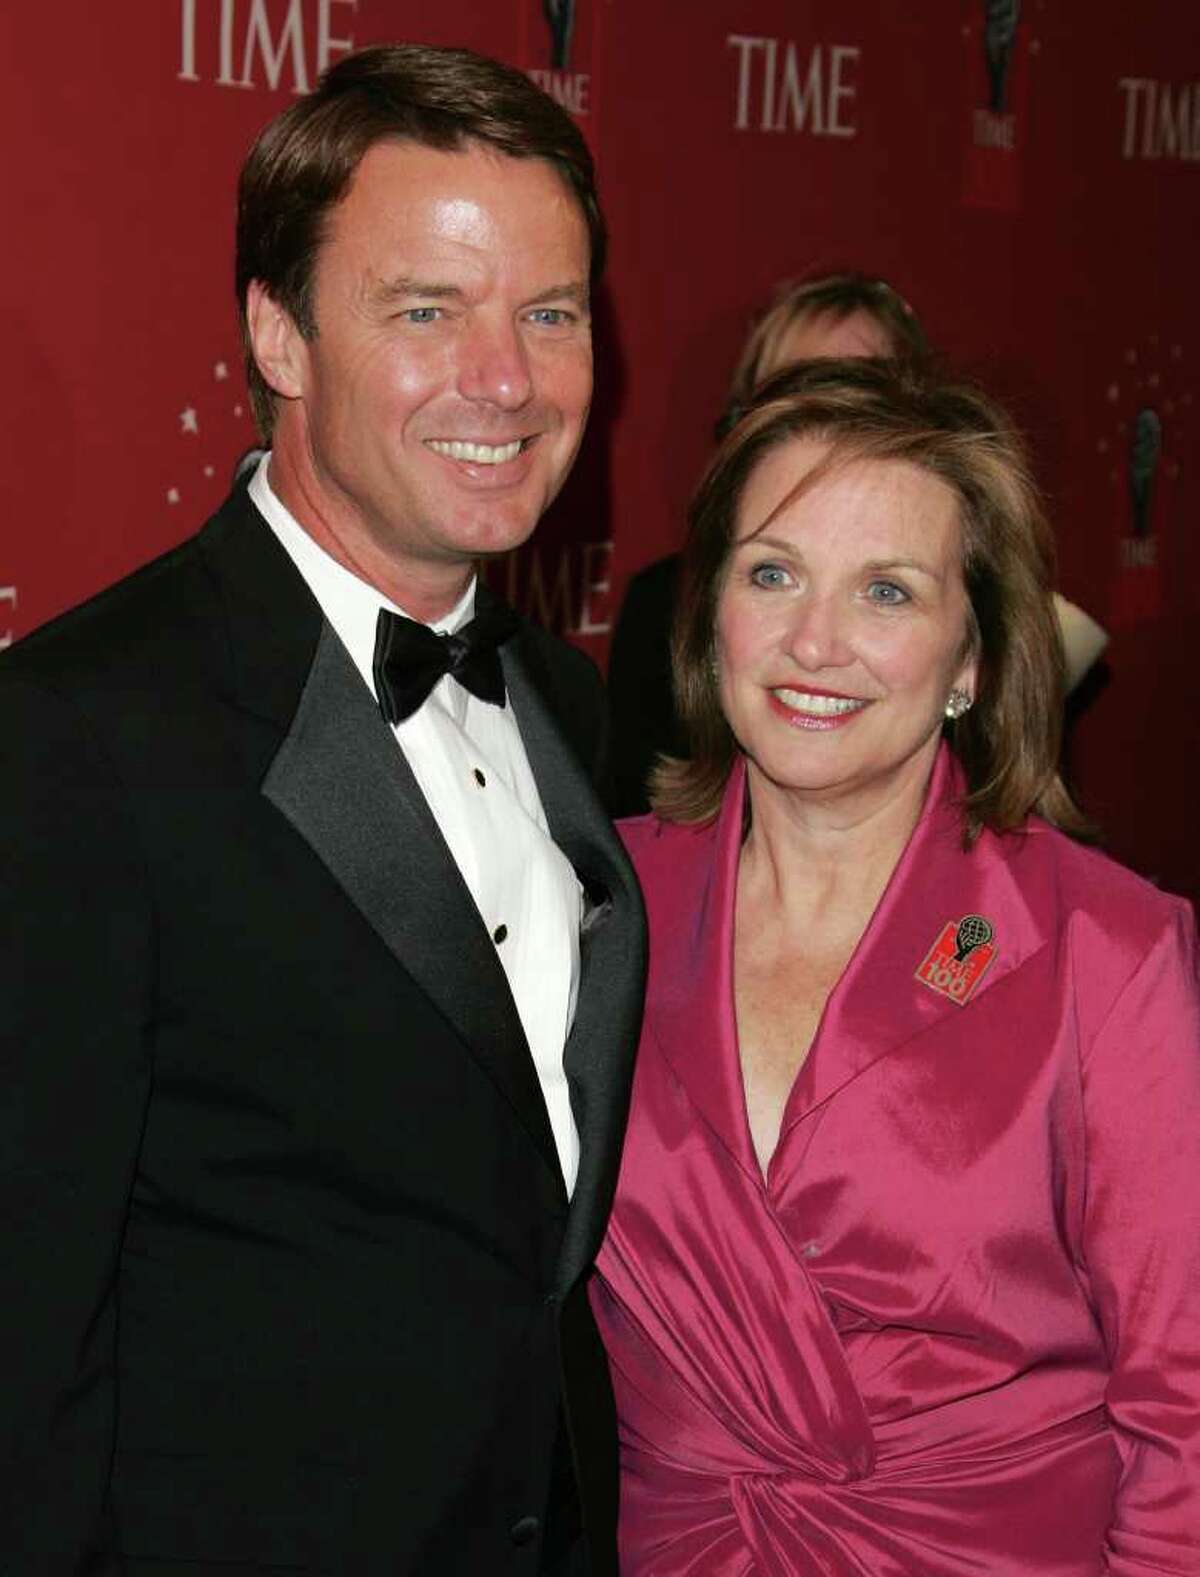 NEW YORK - MAY 08: Senator John Edwards and Elizabeth Edwards attend the Time Magazine's celebration of the 100 most influential people on May 8, 2007 in New York City. (Photo by Peter Kramer/Getty Images) *** Local Caption *** John Edwards;Elizabeth Edwards